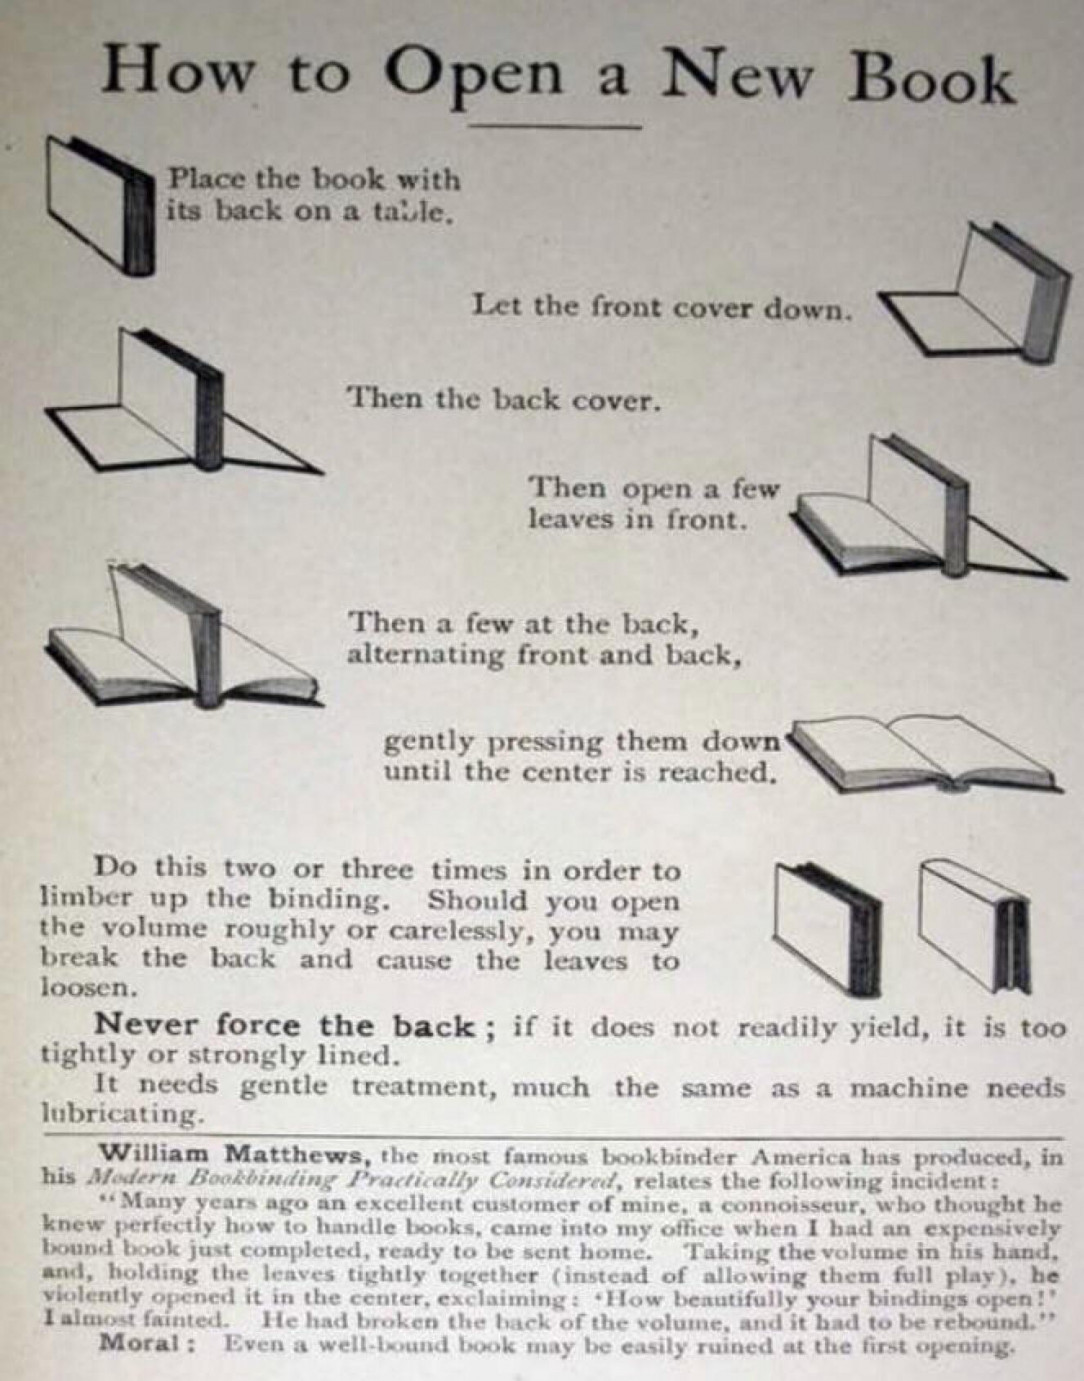 How to open a new book